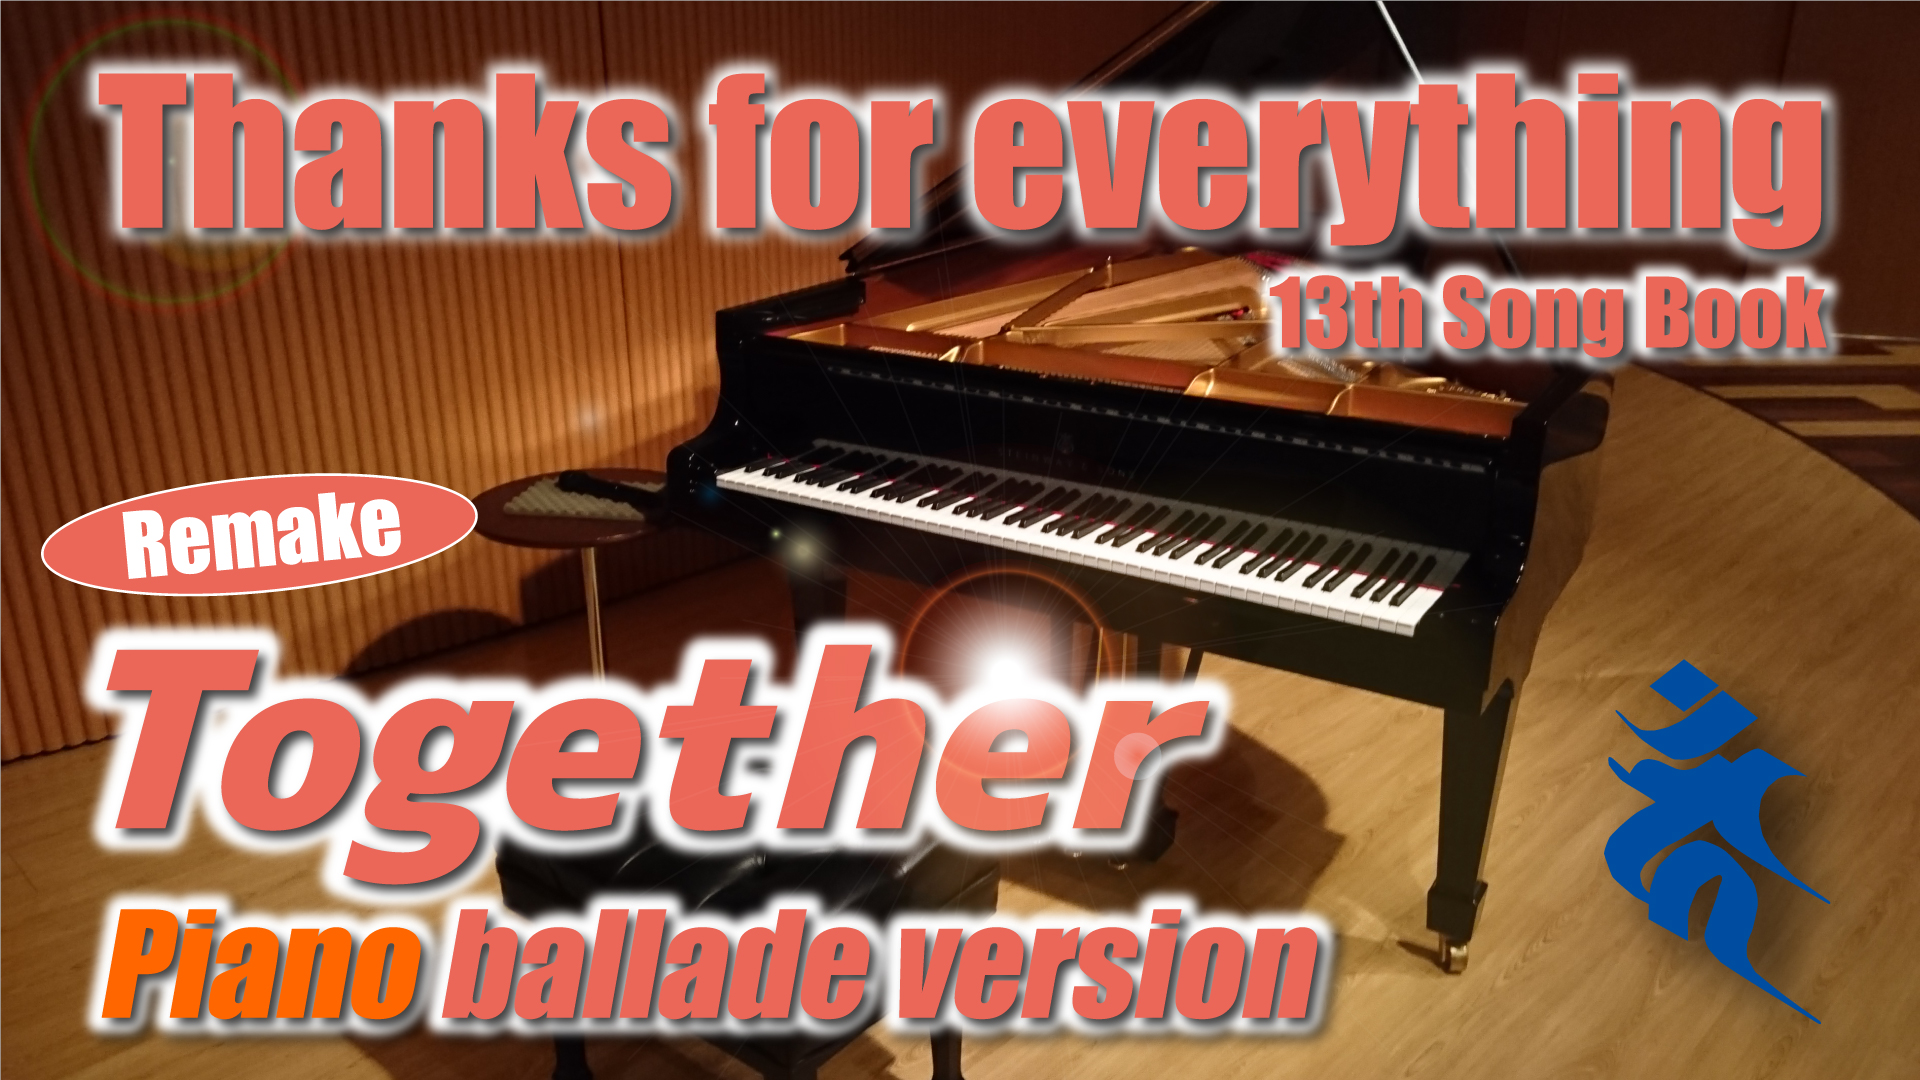 【Together】Piano ballade version｜【Thanks For Everything】13thSongBook